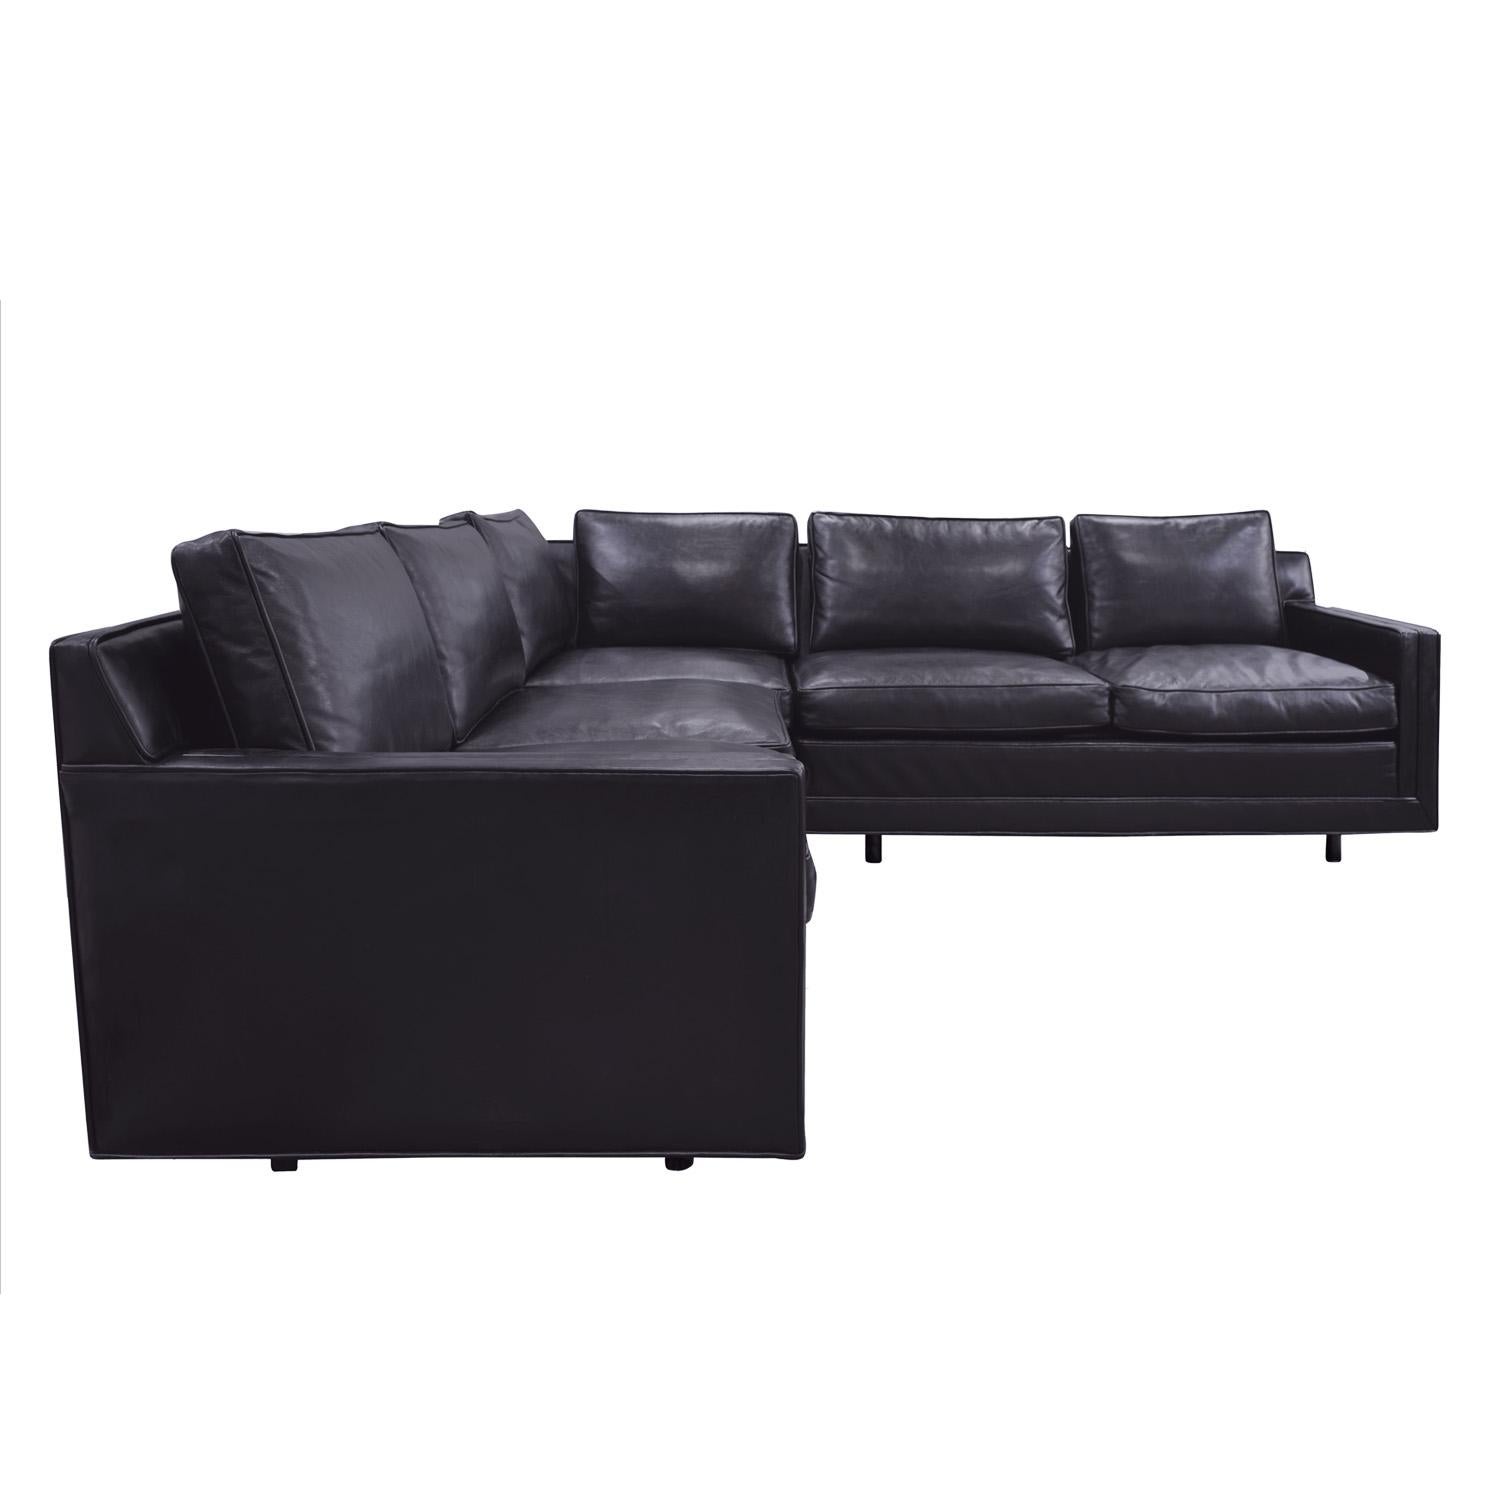 Clean line sectional (2 piece) sofa upholstered in Edelman black leather with mahogany legs by Harvey Probber, American 1950's (signed with original label “furniture design by HARVEY PROBBER”). This sofa was recently reupholstered in black leather